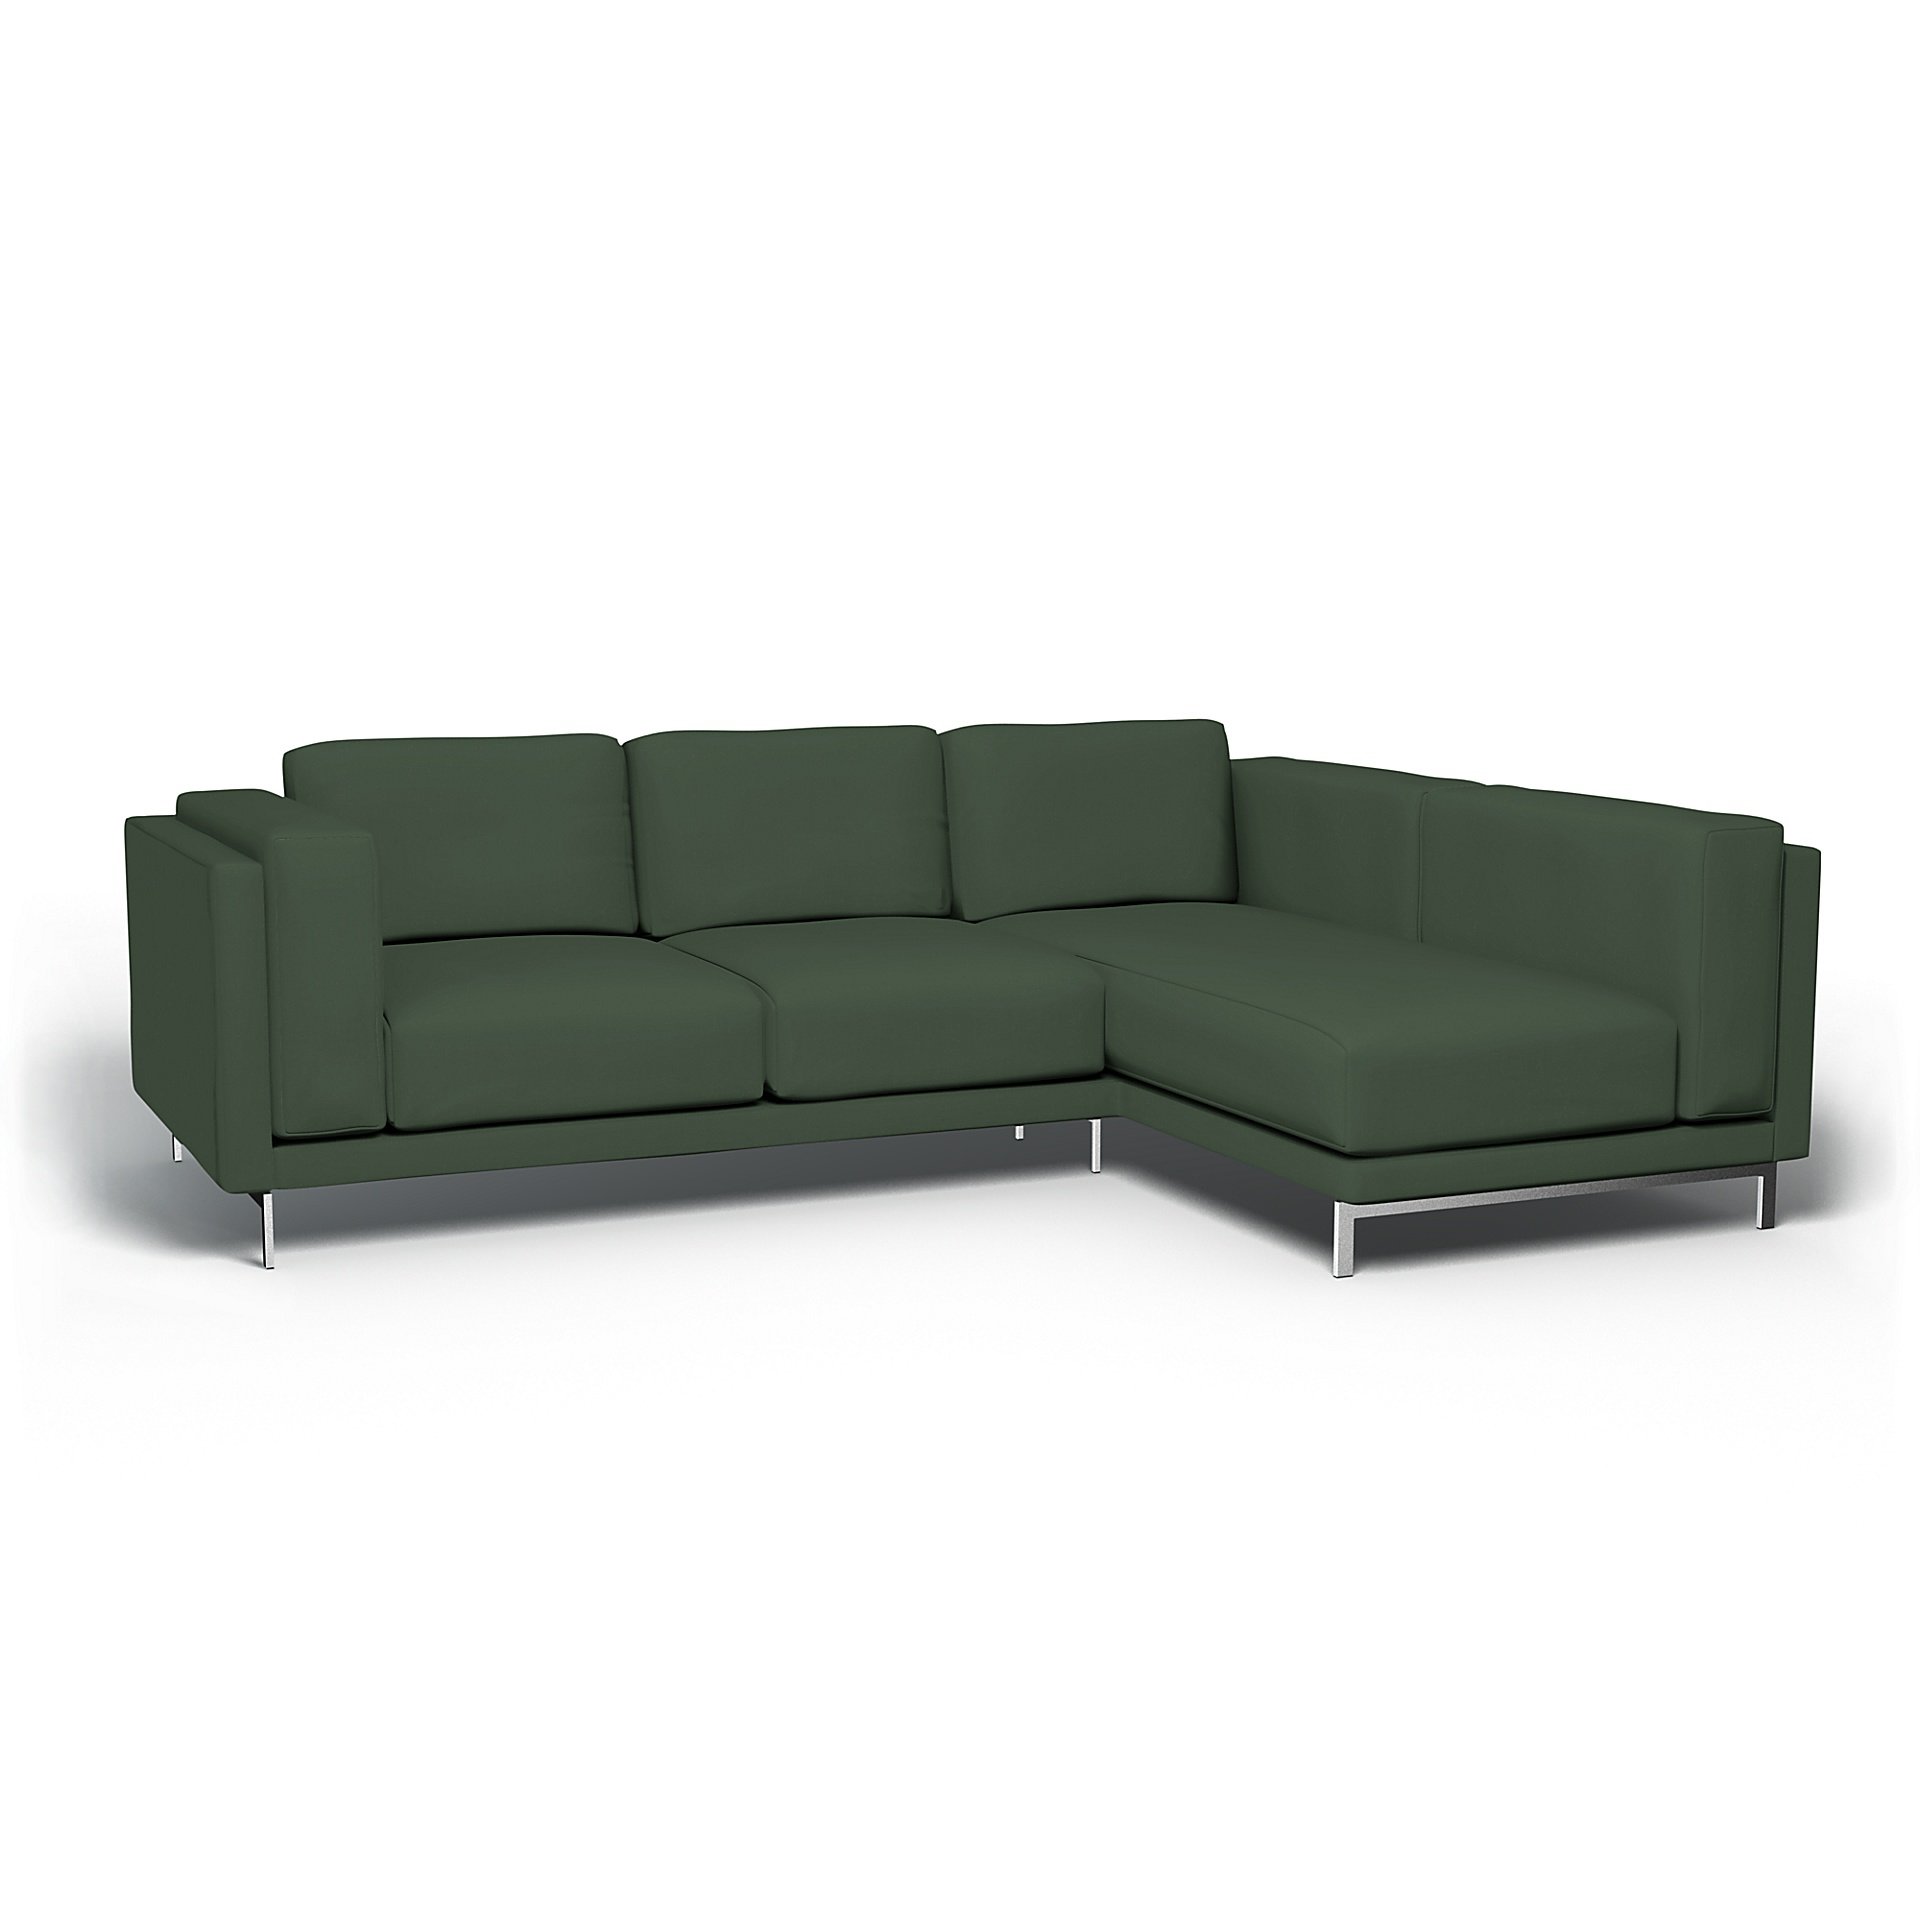 IKEA - Nockeby 3 Seat Sofa with Right Chaise Cover, Thyme, Cotton - Bemz